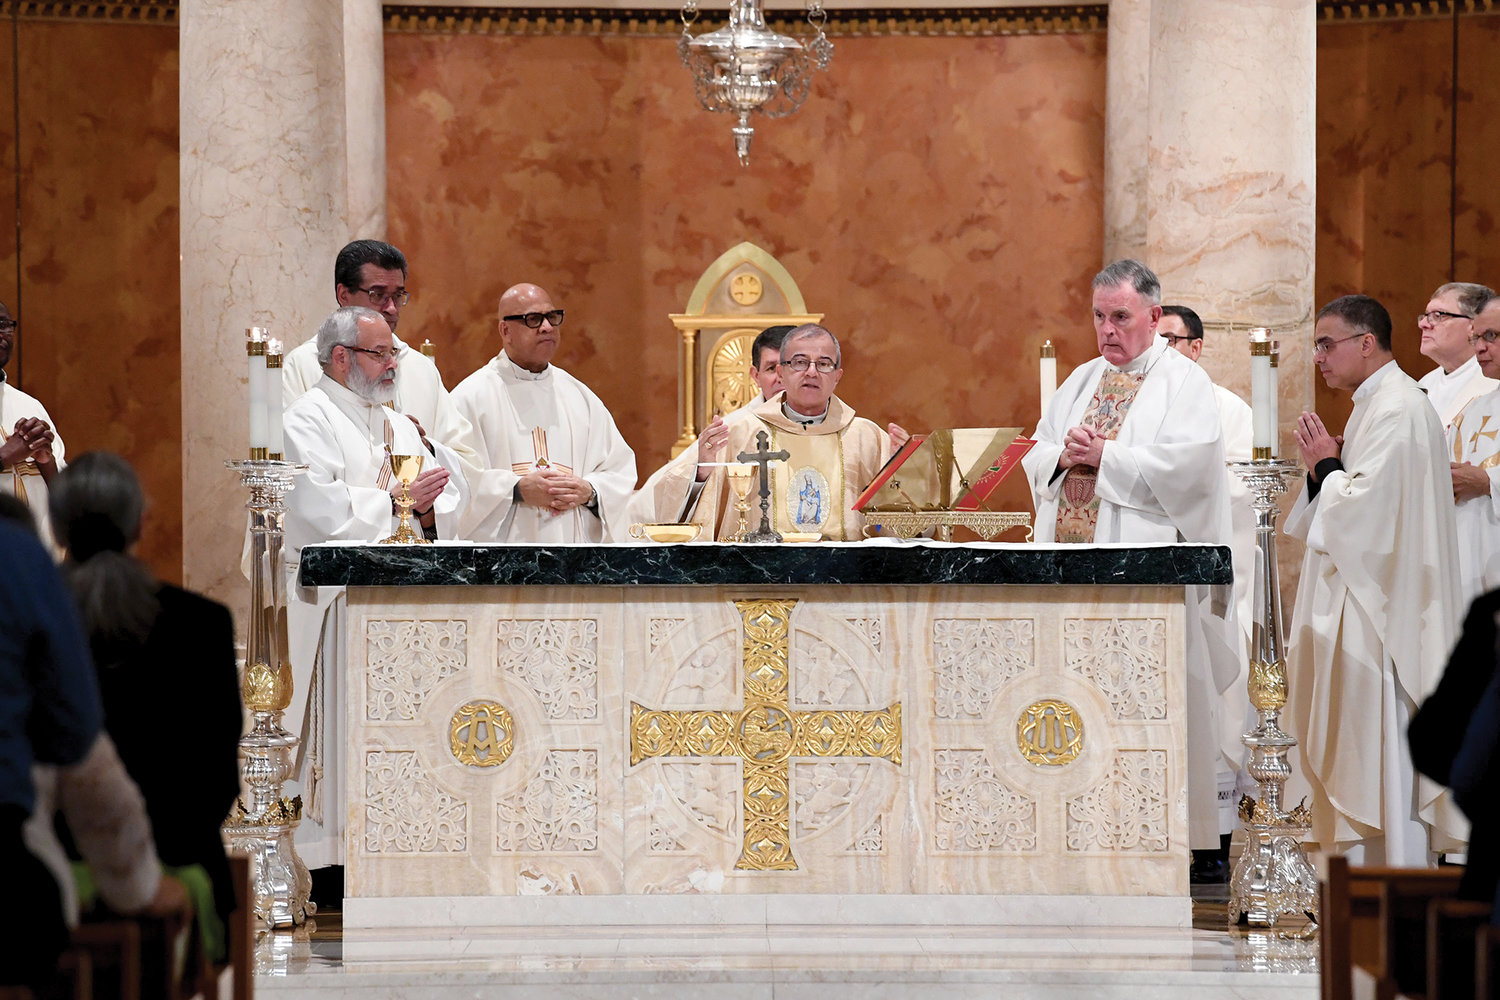 Archbishop Roberto Gonzalez of San Juan, Puerto Rico, celebrates a Solemn Mass for the People of Puerto Rico Feb. 2 at St. Raymond Church in the Bronx. The liturgy served as a sign of solidarity after the recent earthquakes that struck the Caribbean island. Auxiliary Bishop Gerald Walsh, near the archbishop to the right, was among the concelebrants. Next to the bishop is Father James Cruz, pastor of St. Raymond’s parish.